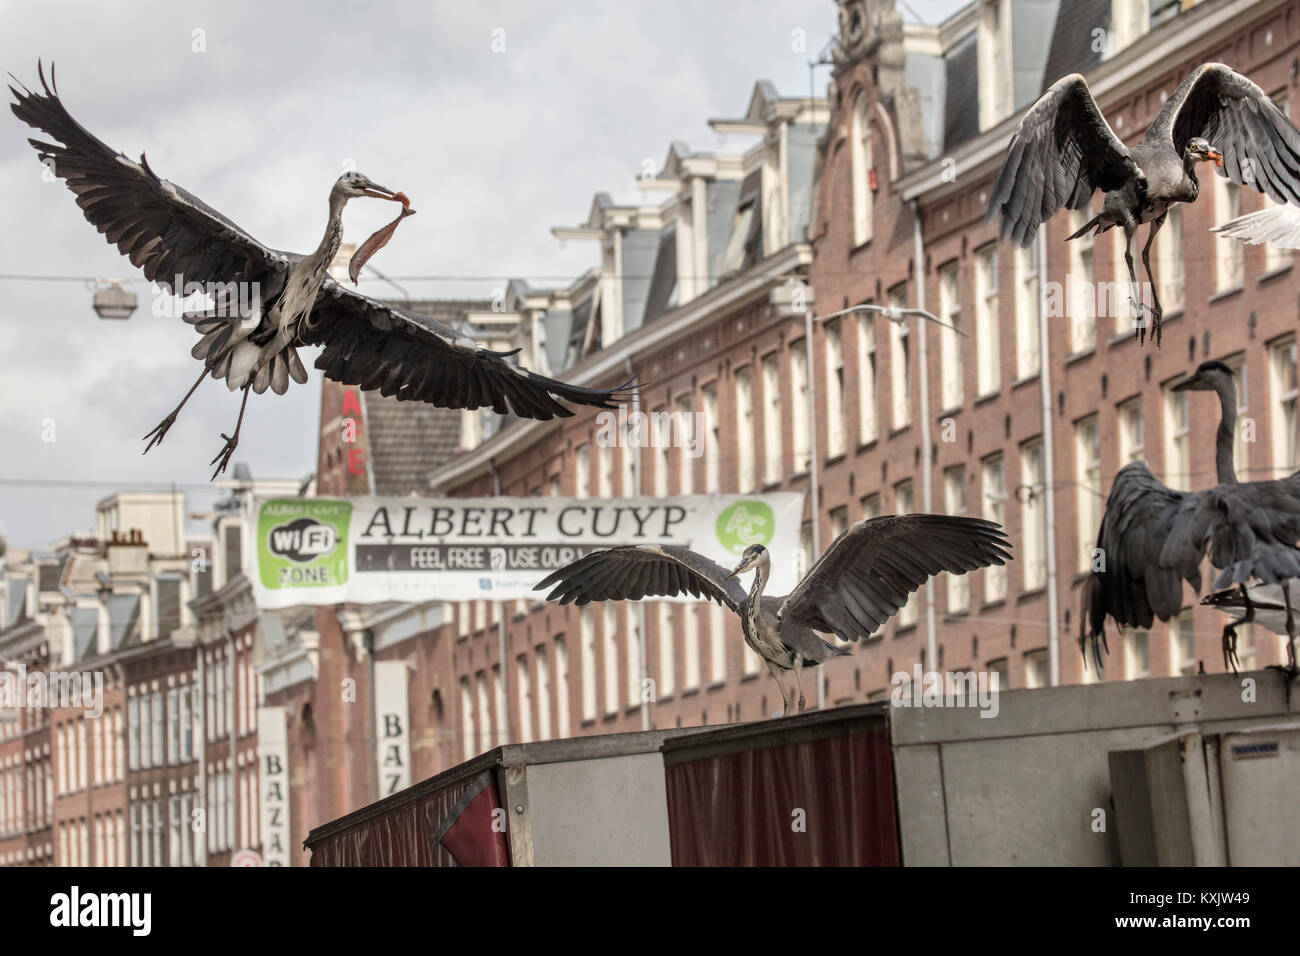 The Netherlands, Amsterdam, Albert Cuyp market. Blue herons catch pieces of fish from market stall. Urban Nature. Jungle. Wildlife. Stock Photo